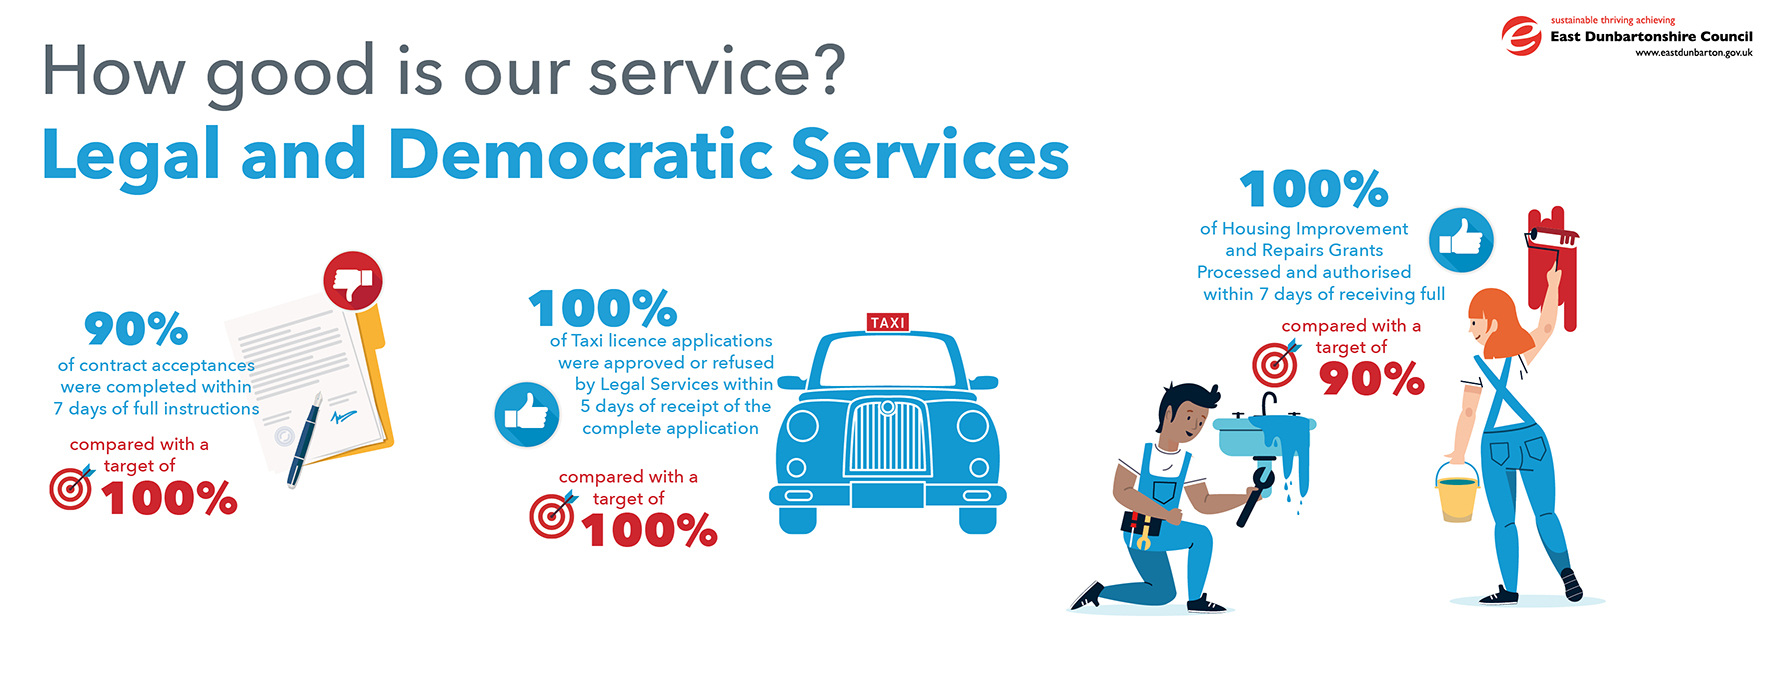 infographic showing statistics for legal and democratic services 